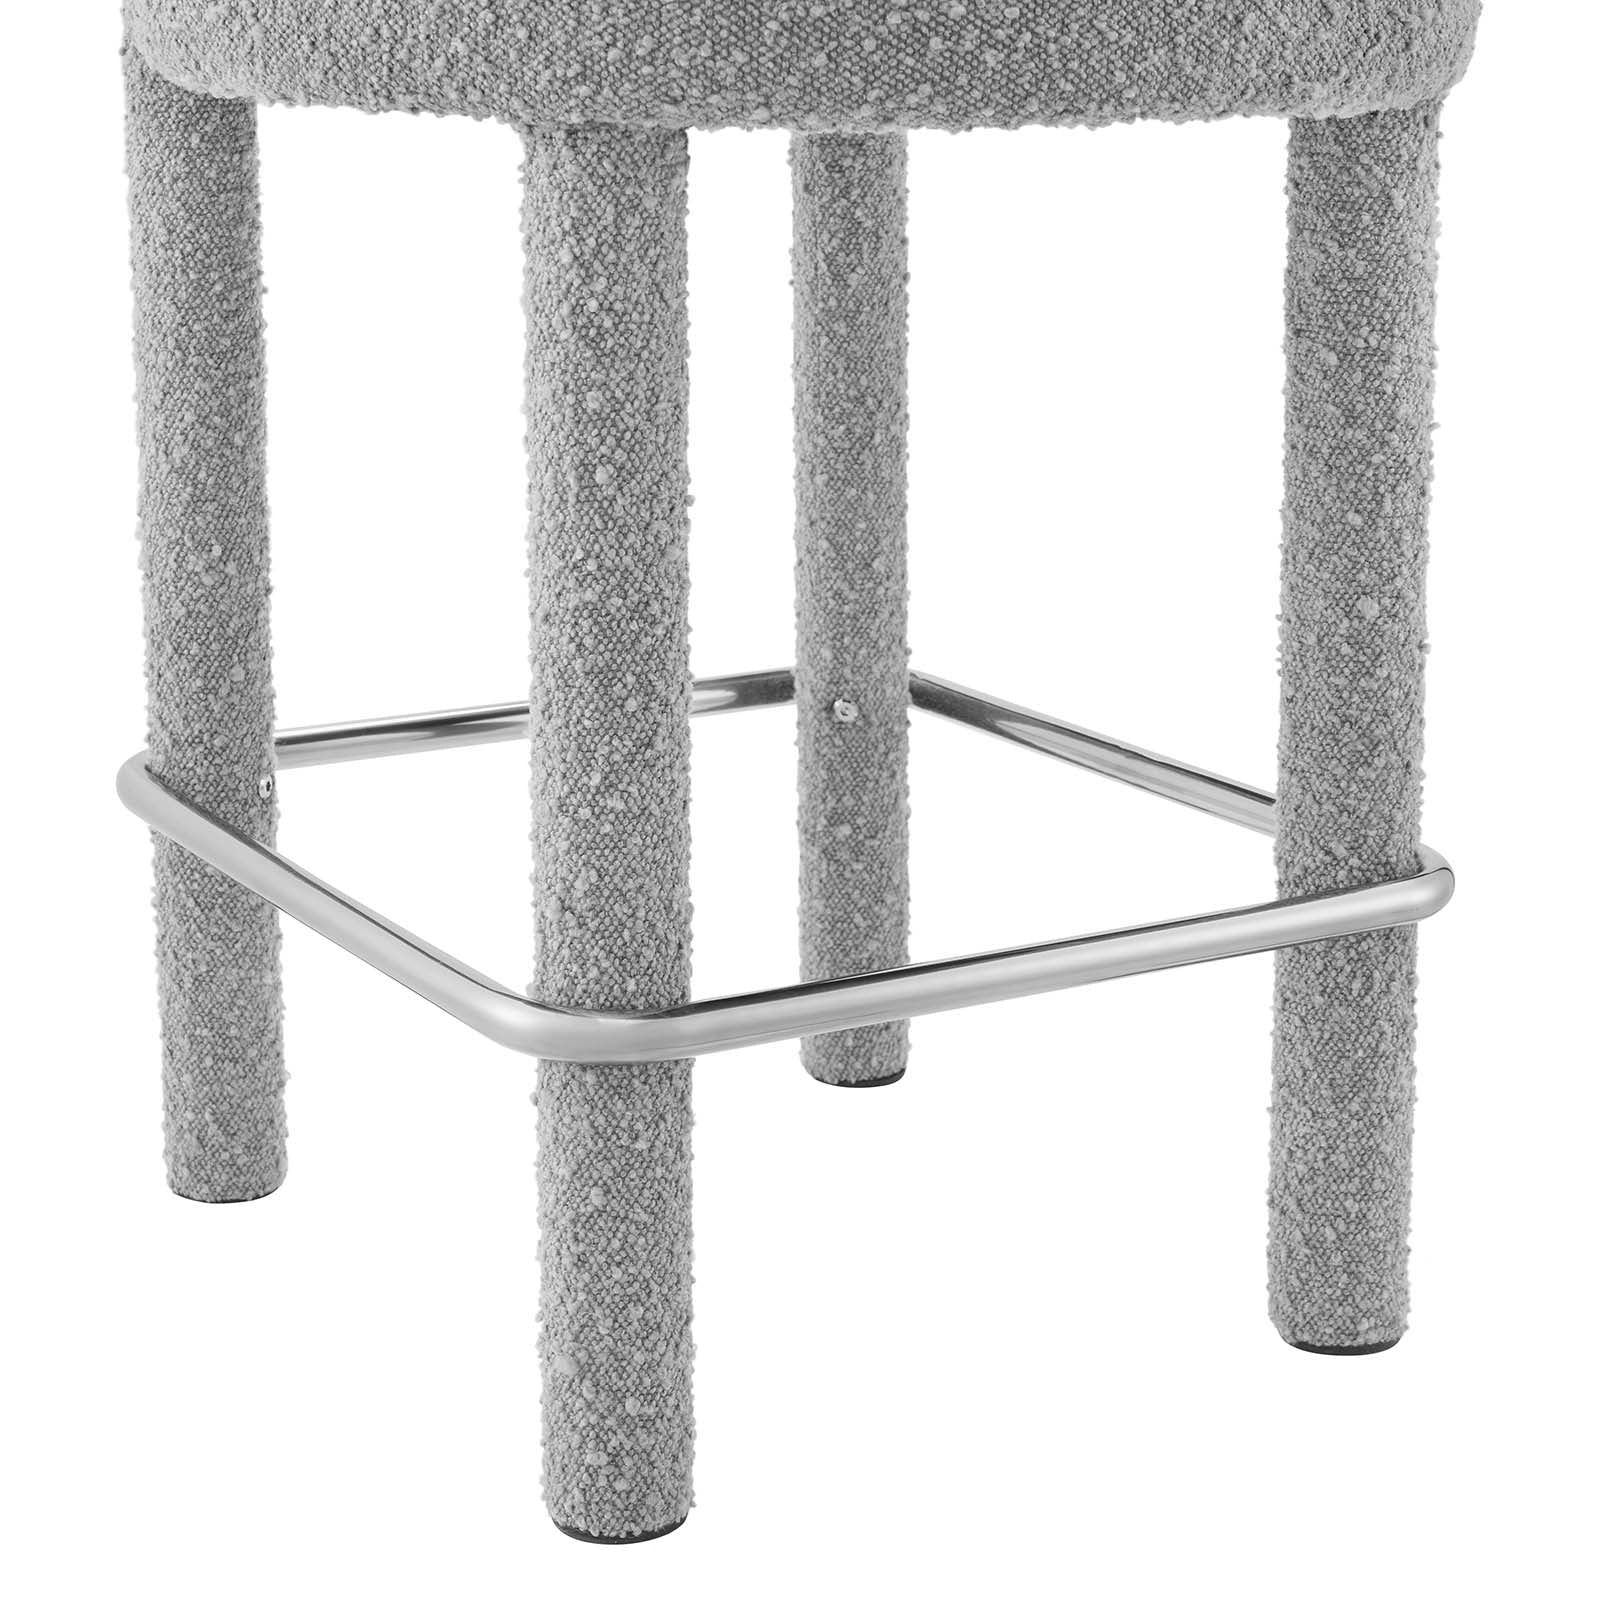 Toulouse Boucle Fabric Counter Stool-Counter Stool-Modway-Wall2Wall Furnishings